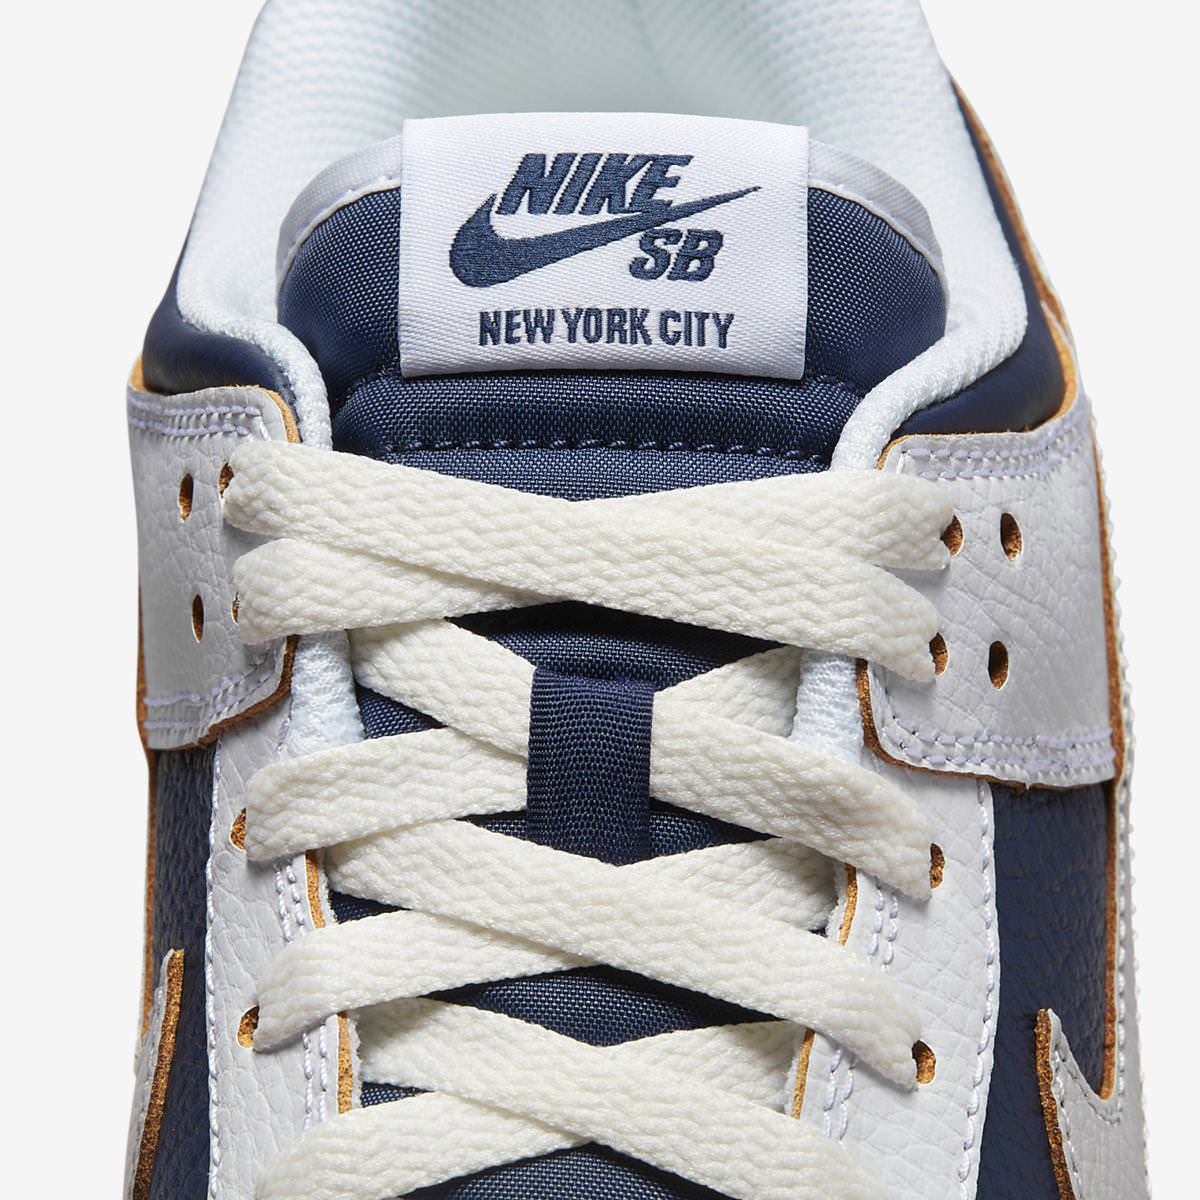 HUF Nike SB Dunk Low NYC FD8775-100 Release Date